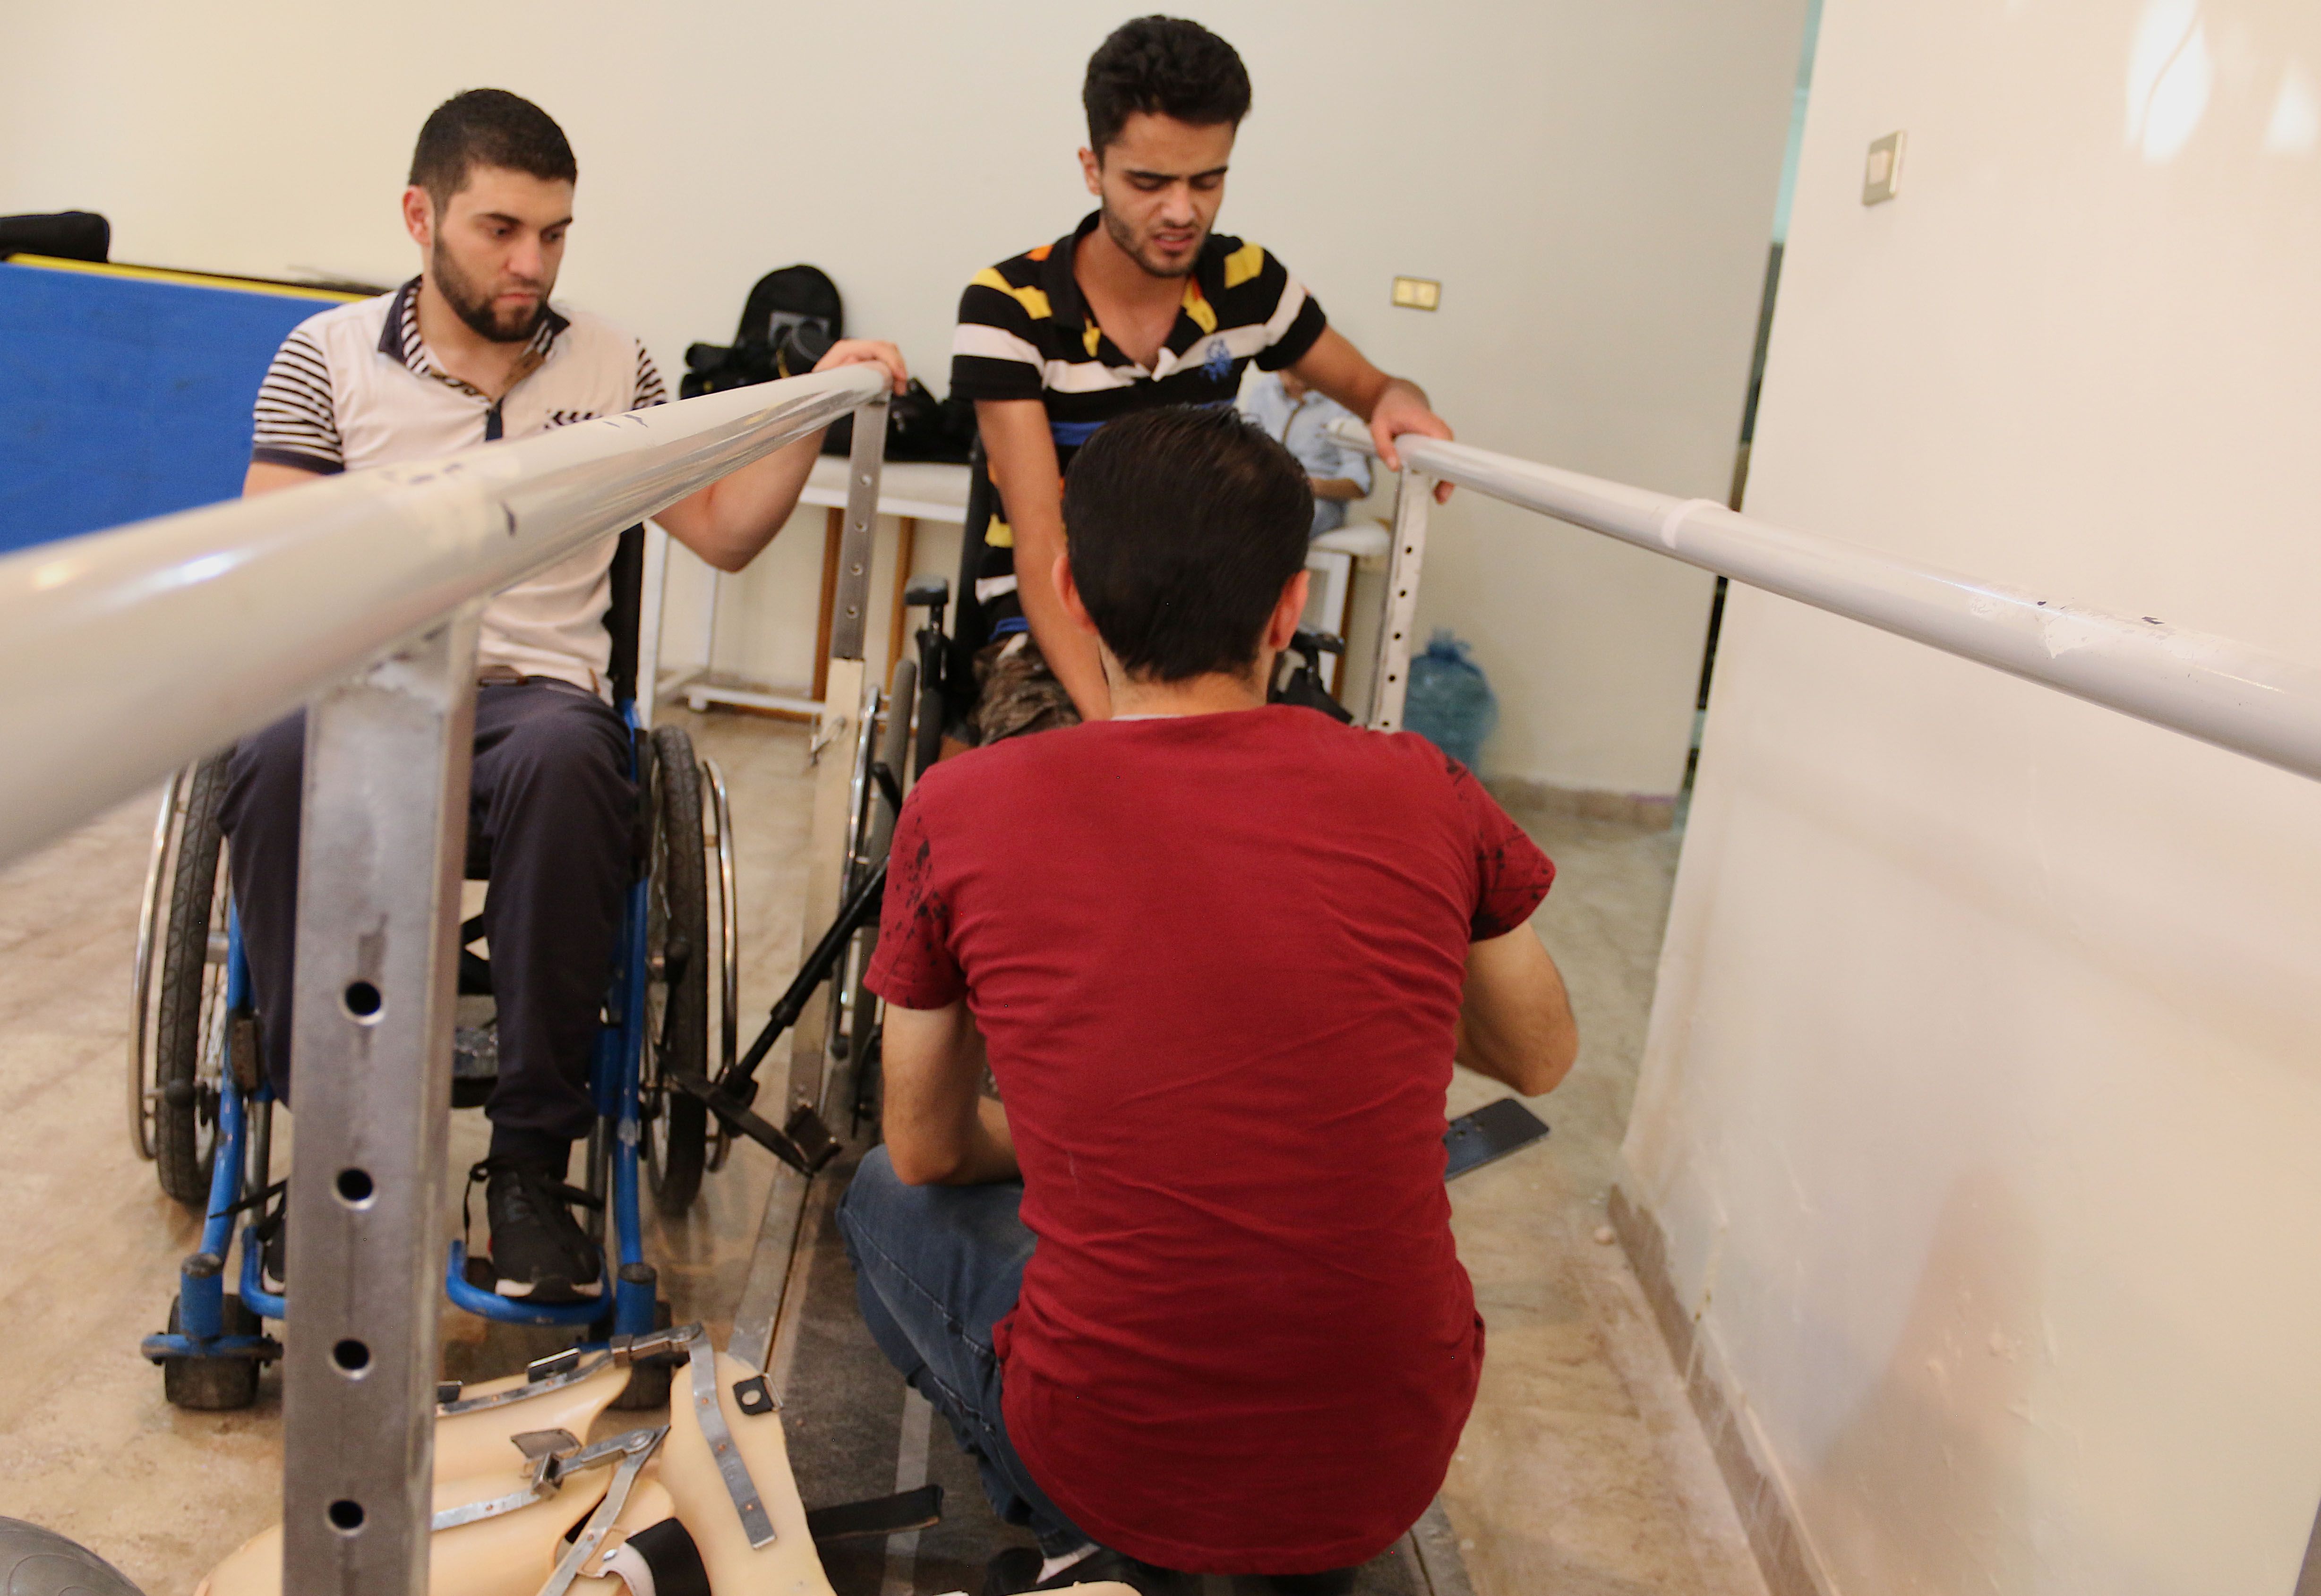 Obada Alasmi watches as a trainer helps Mohammed Ayyash lift his legs. Ayyash was paralyzed in an attack in Syria. Image by Sawsan Morrar. Jordan, 2017.